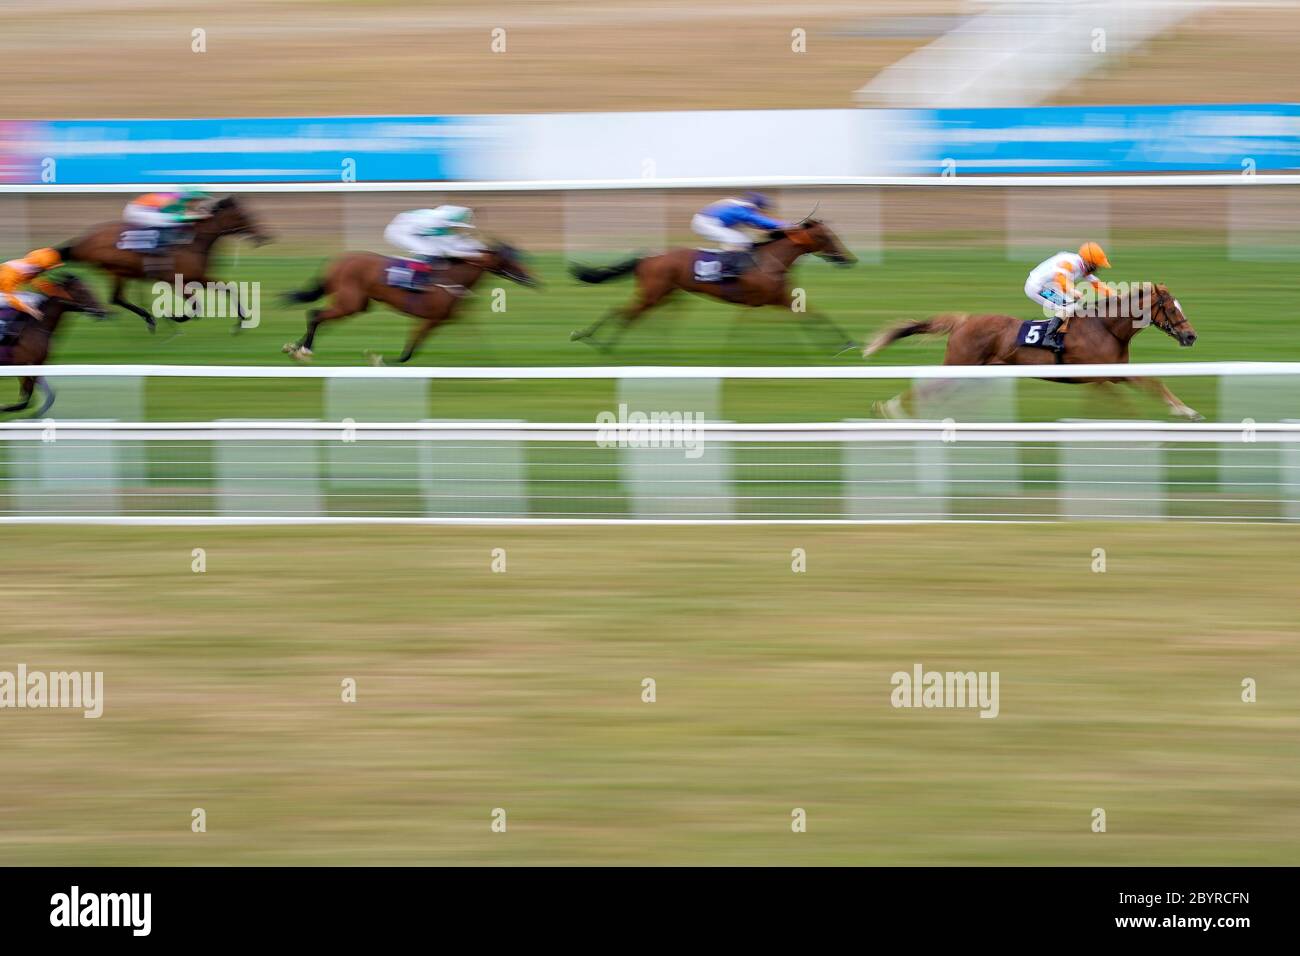 Kentucky Hardboot ridden by Stevie Donohoe wins The Follow At The Races On Twitter Handicap at Great Yarmouth Racecourse. Stock Photo